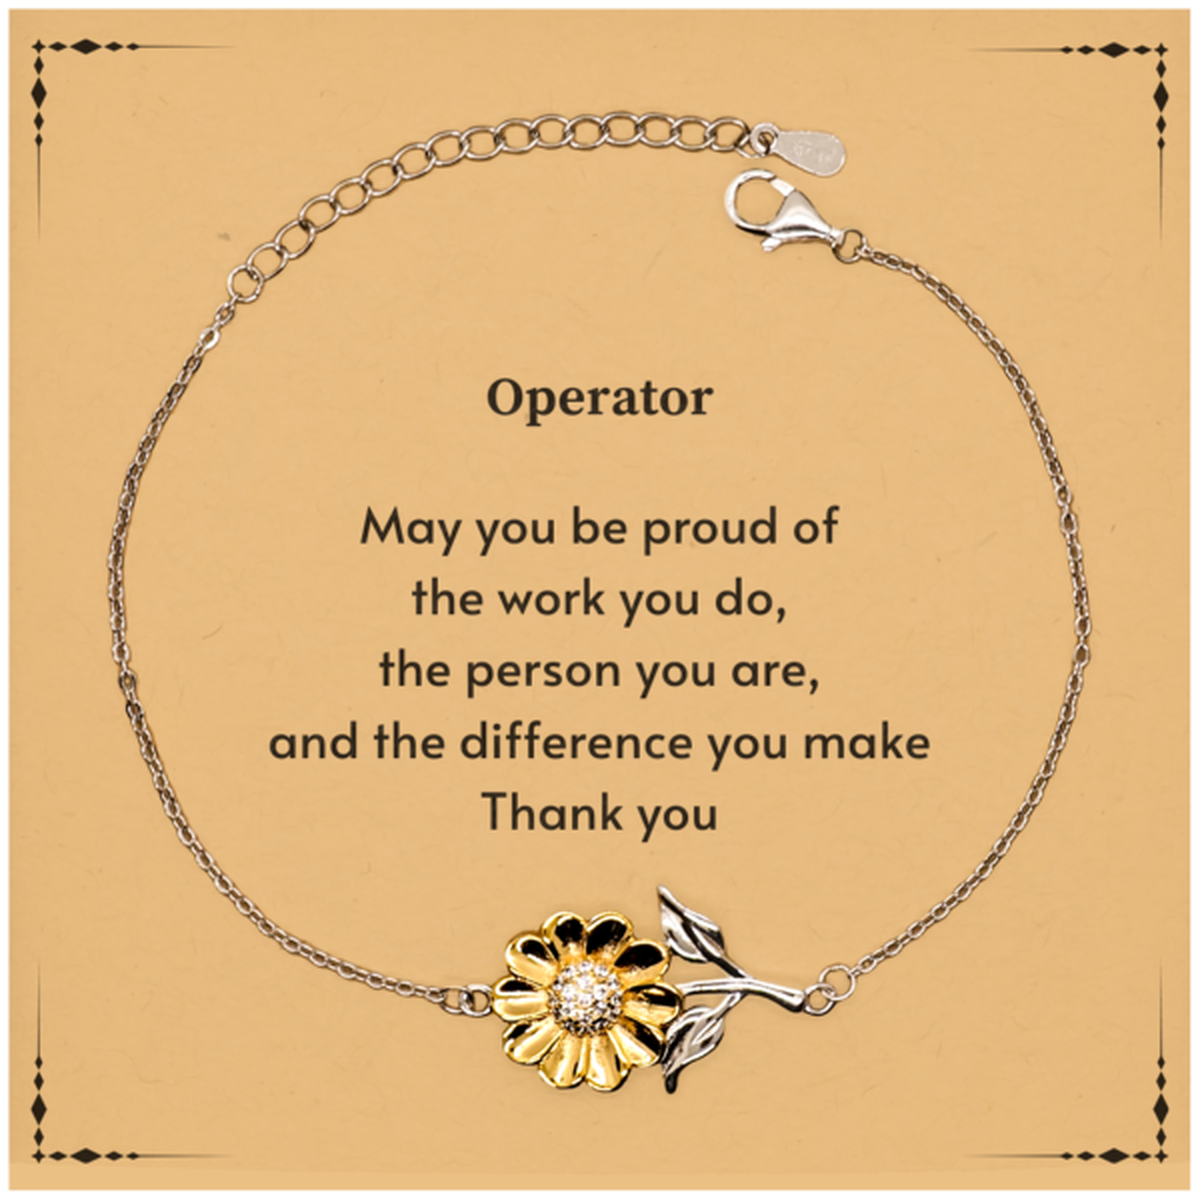 Heartwarming Sunflower Bracelet Retirement Coworkers Gifts for Operator, Operator May You be proud of the work you do, the person you are Gifts for Boss Men Women Friends